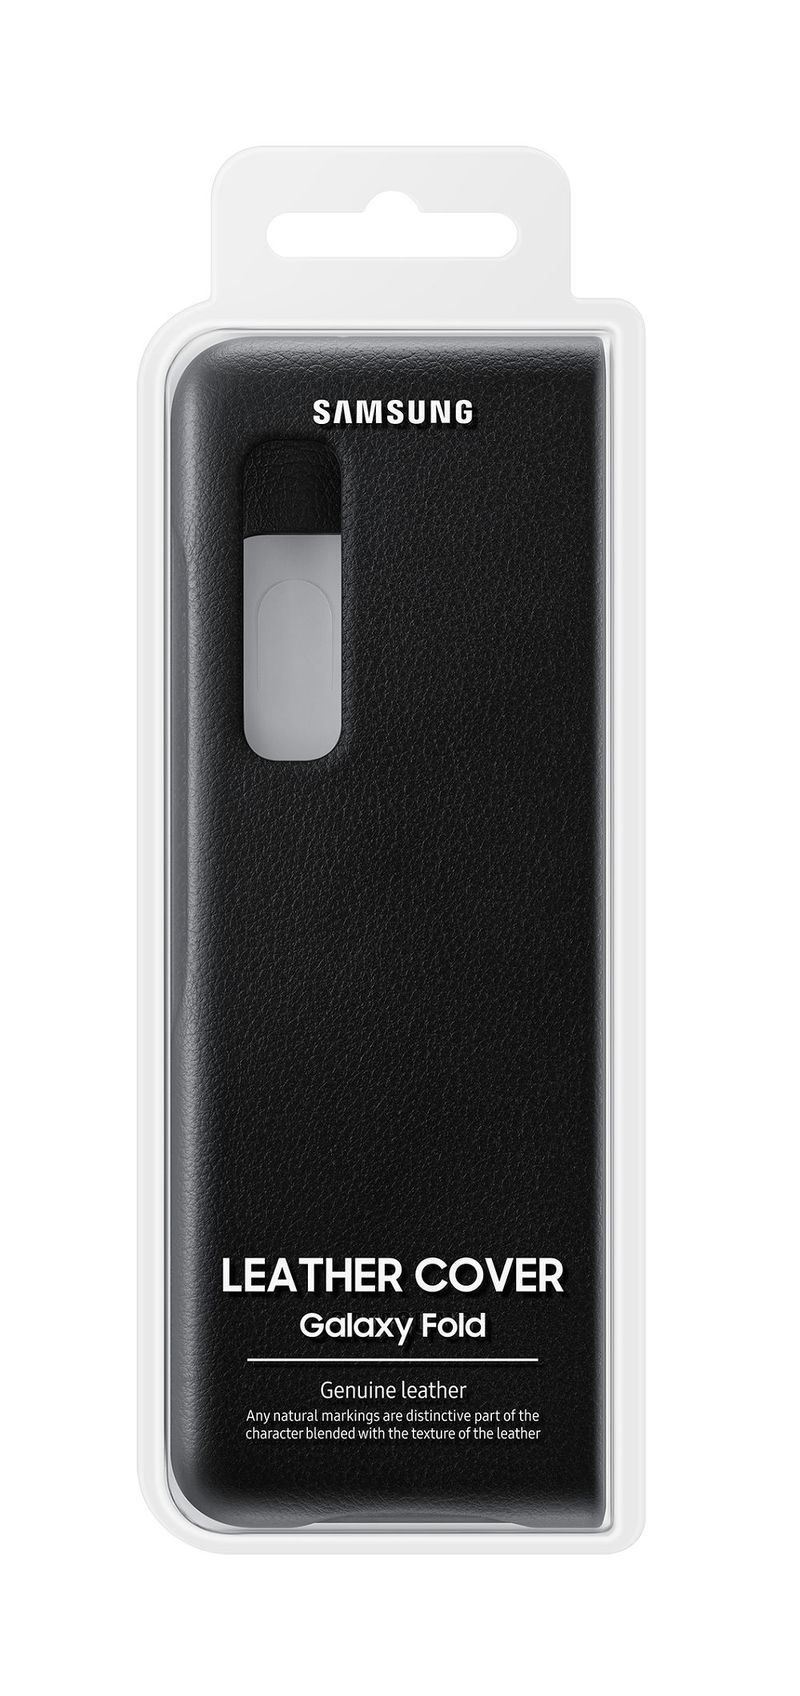 Samsung Leather Cover Black for Galaxy Fold